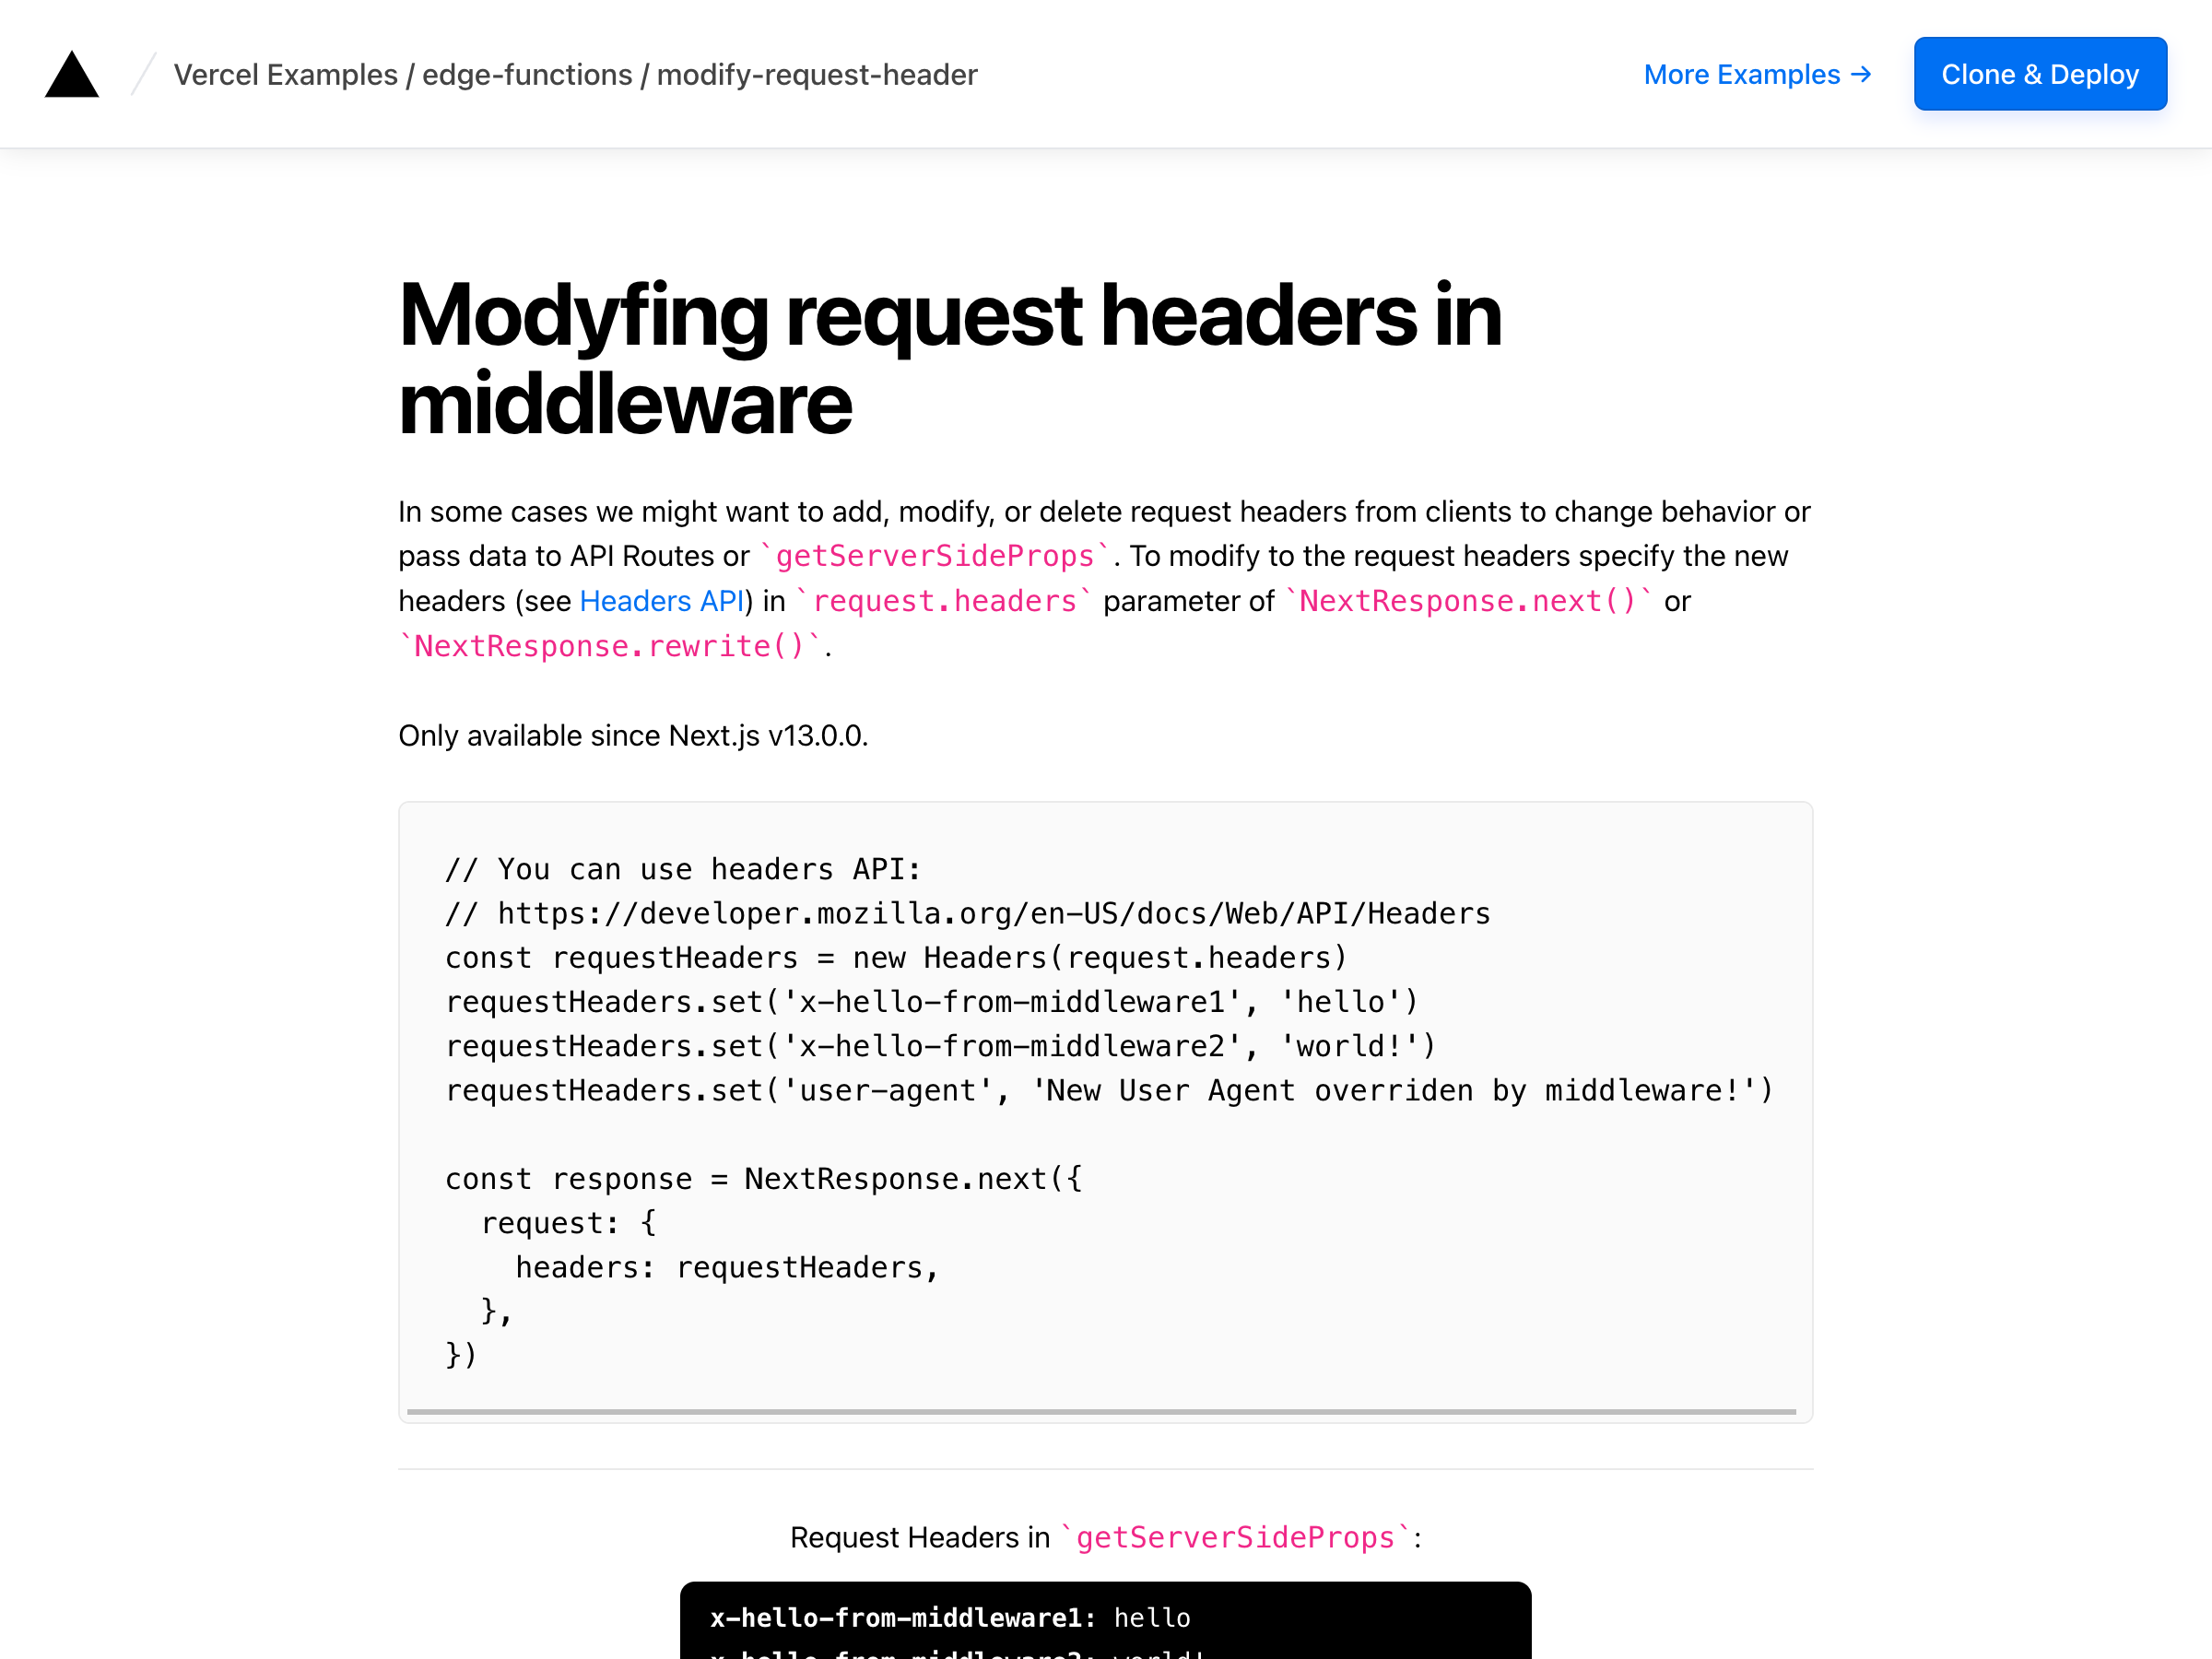 Screenshot of "Modifying Request Headers in Middleware" example